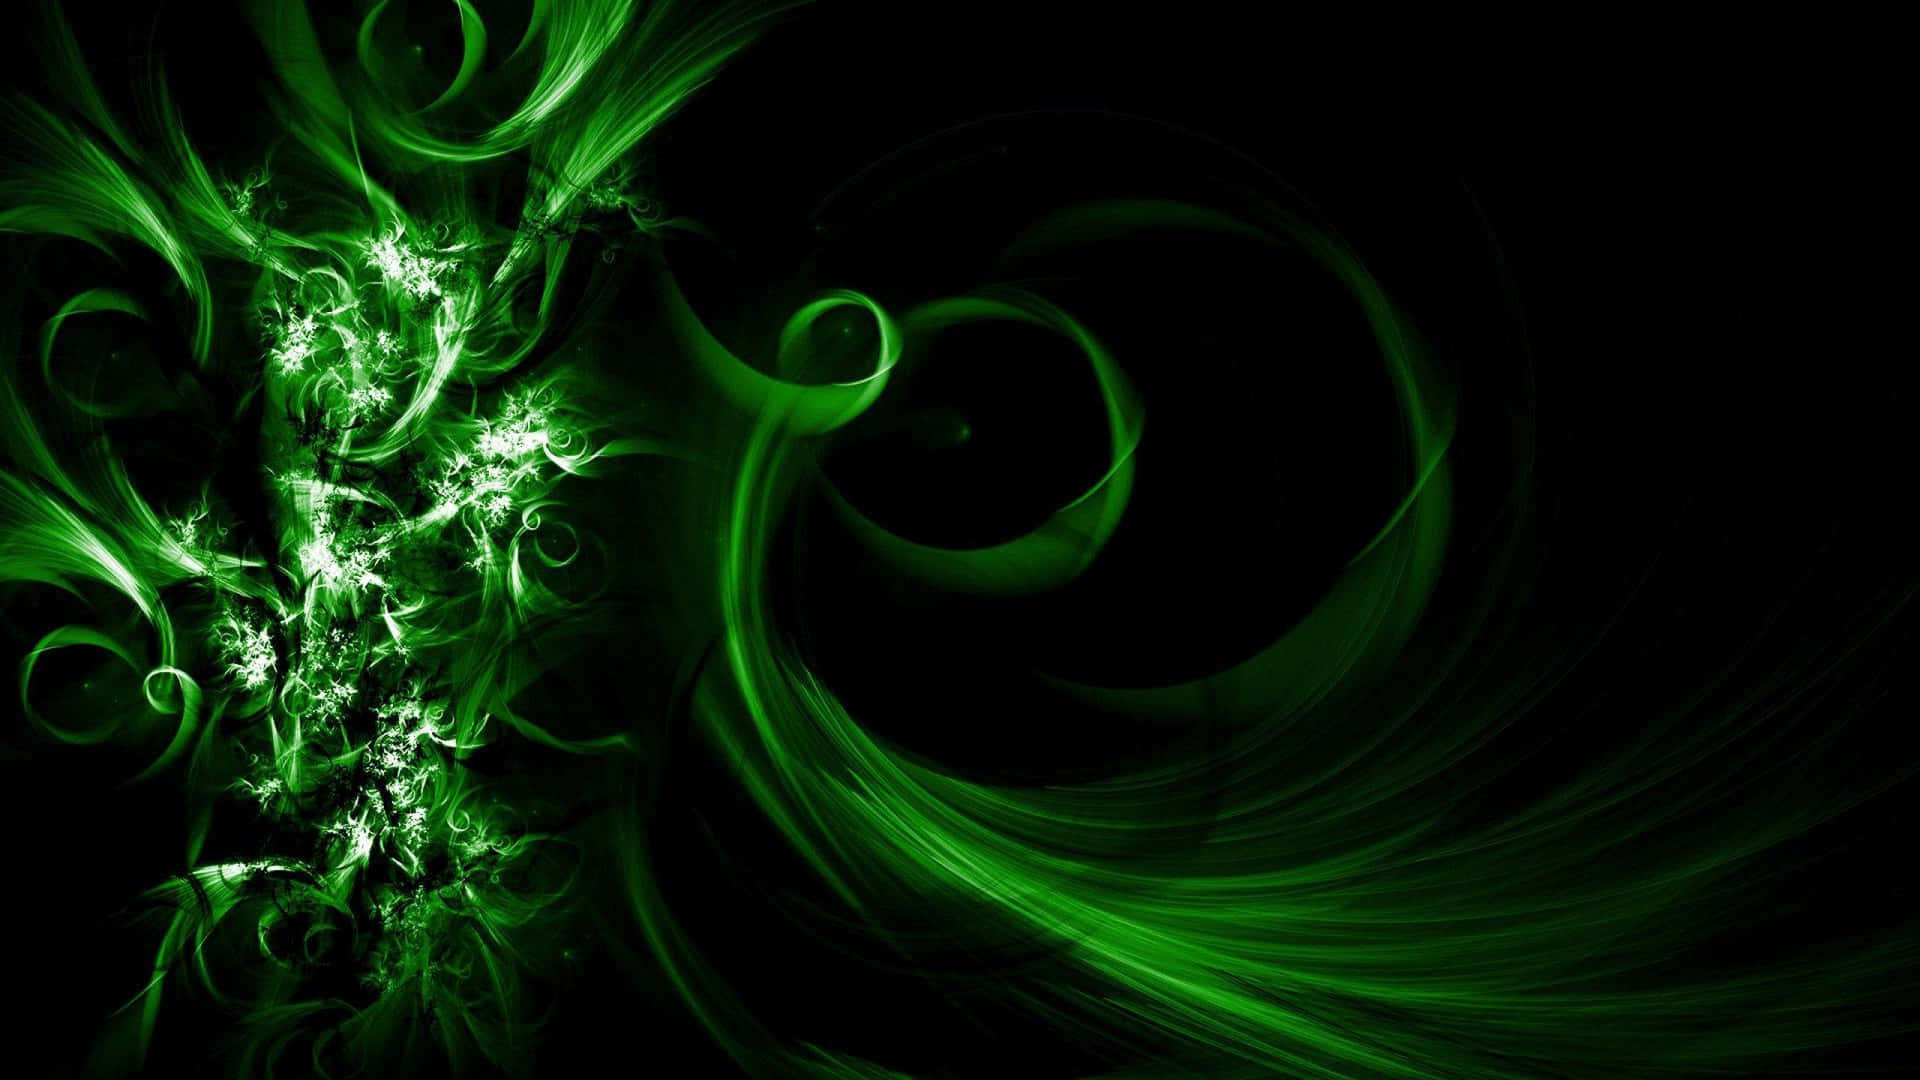 Wallpaper green vector abstract black design art background material  images for desktop section абстракции  download